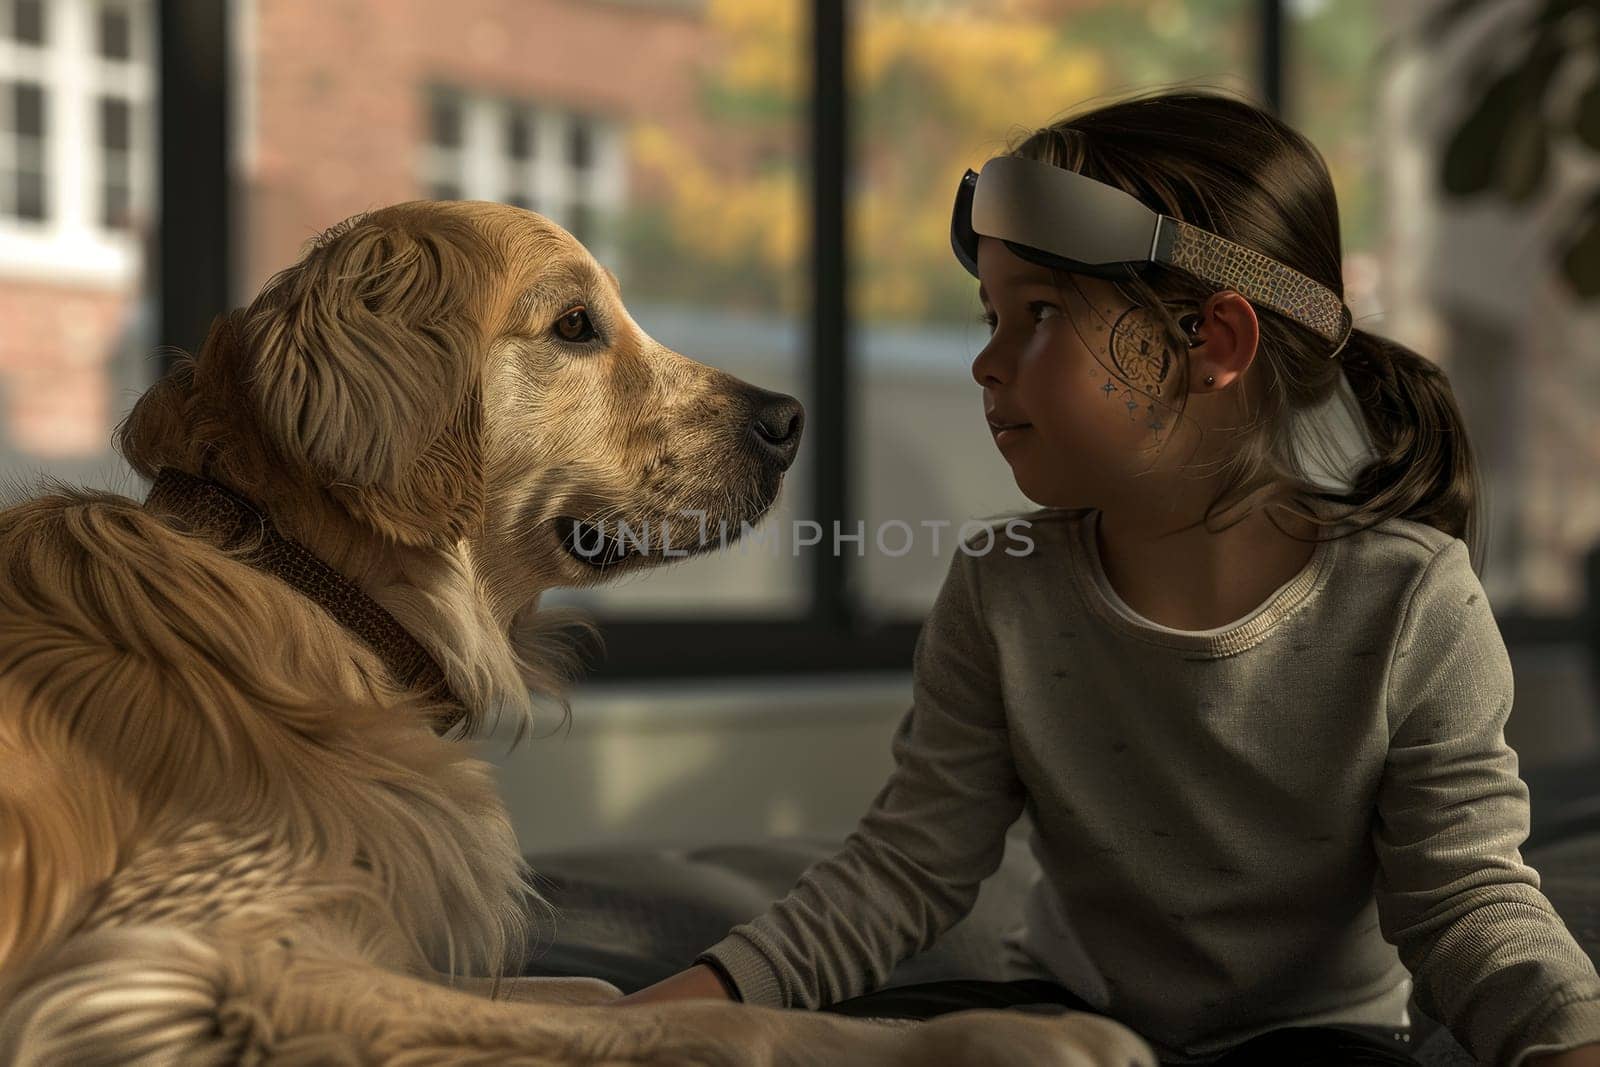 Child with Autism Bonds with Golden Retriever by andreyz